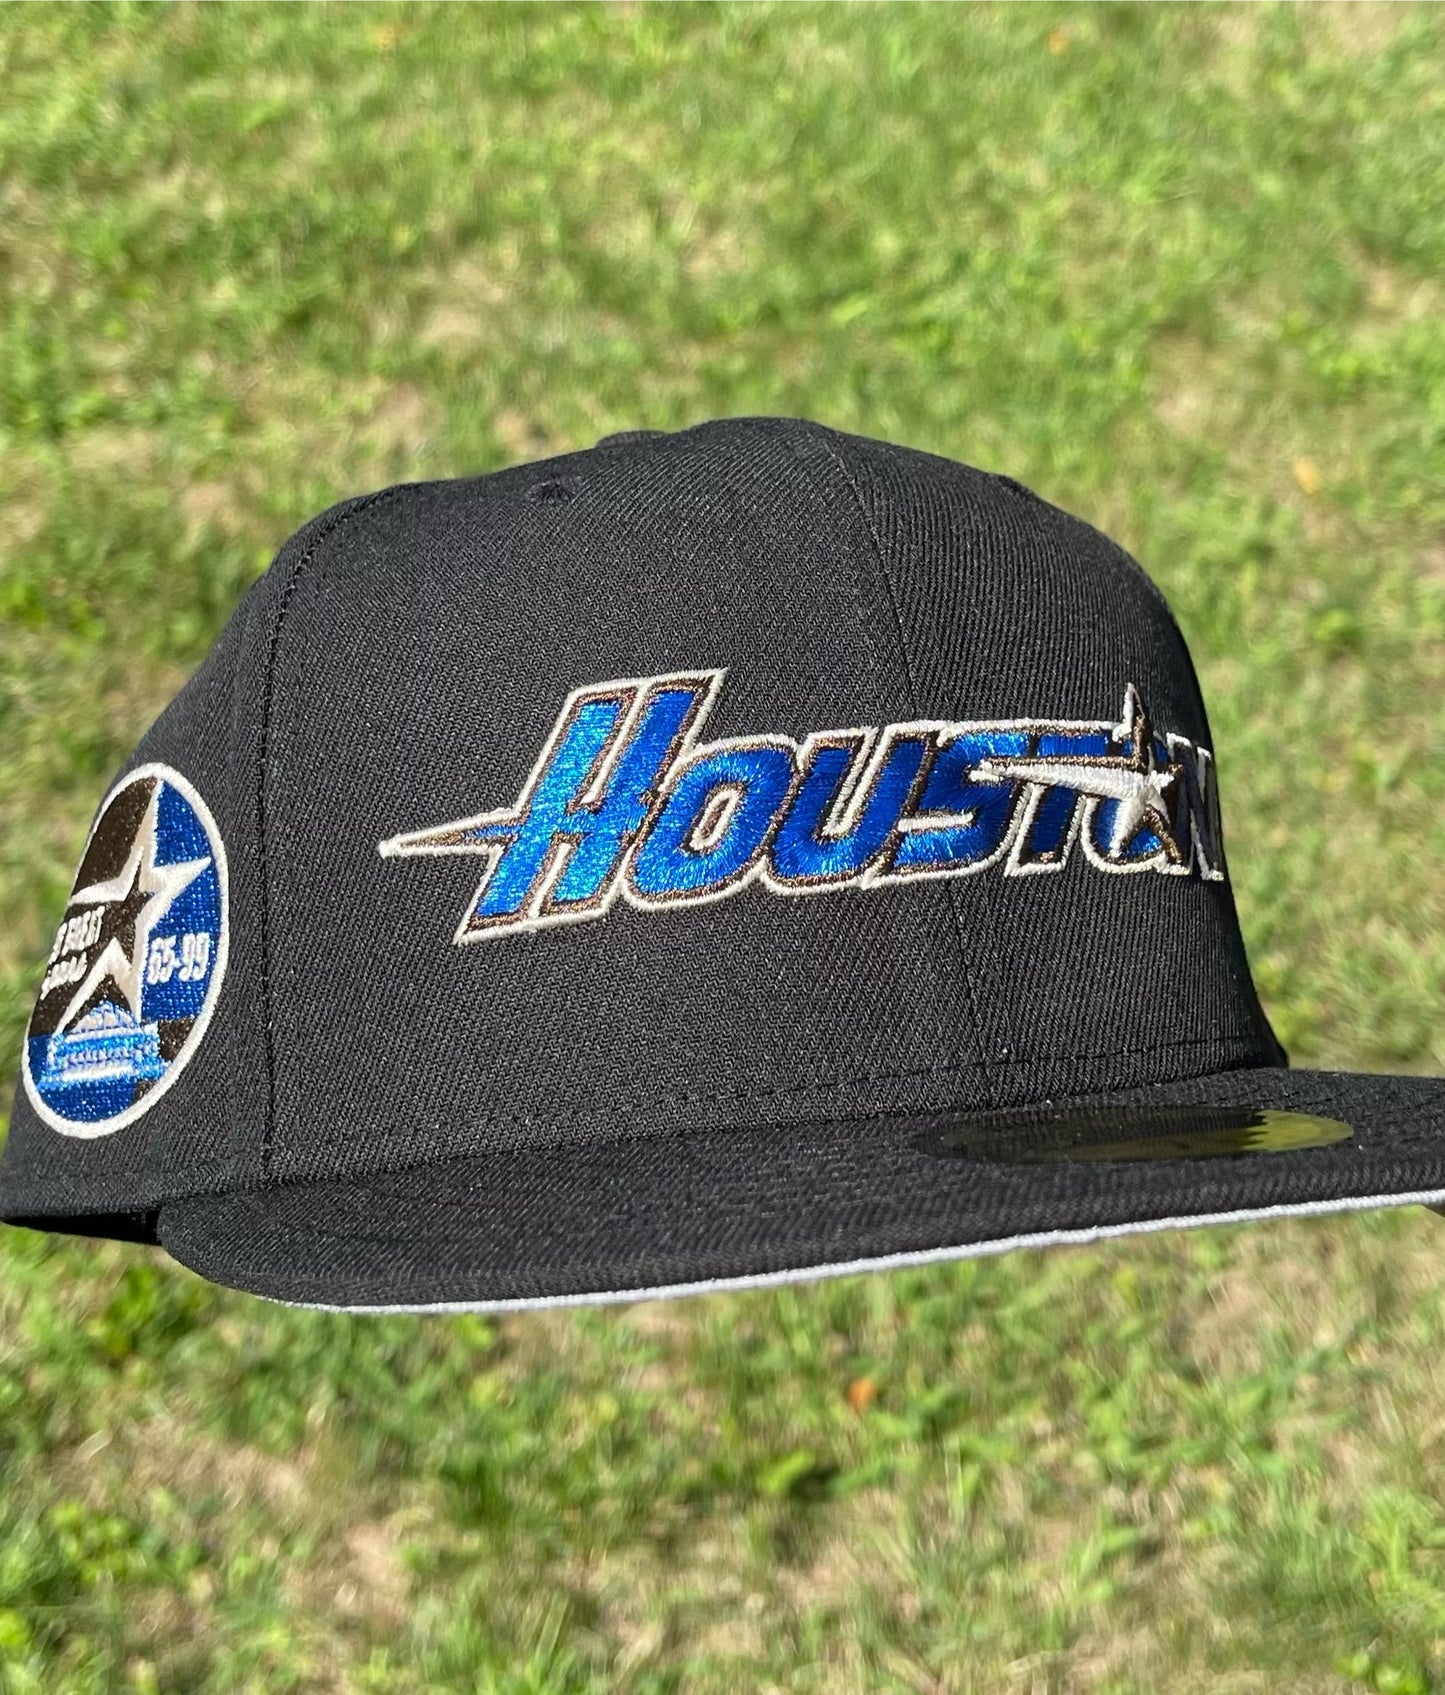 Houston Astros 35 Great Years Side Patch Fitted Hat ((Black/Blue/Gray) New Era 5950